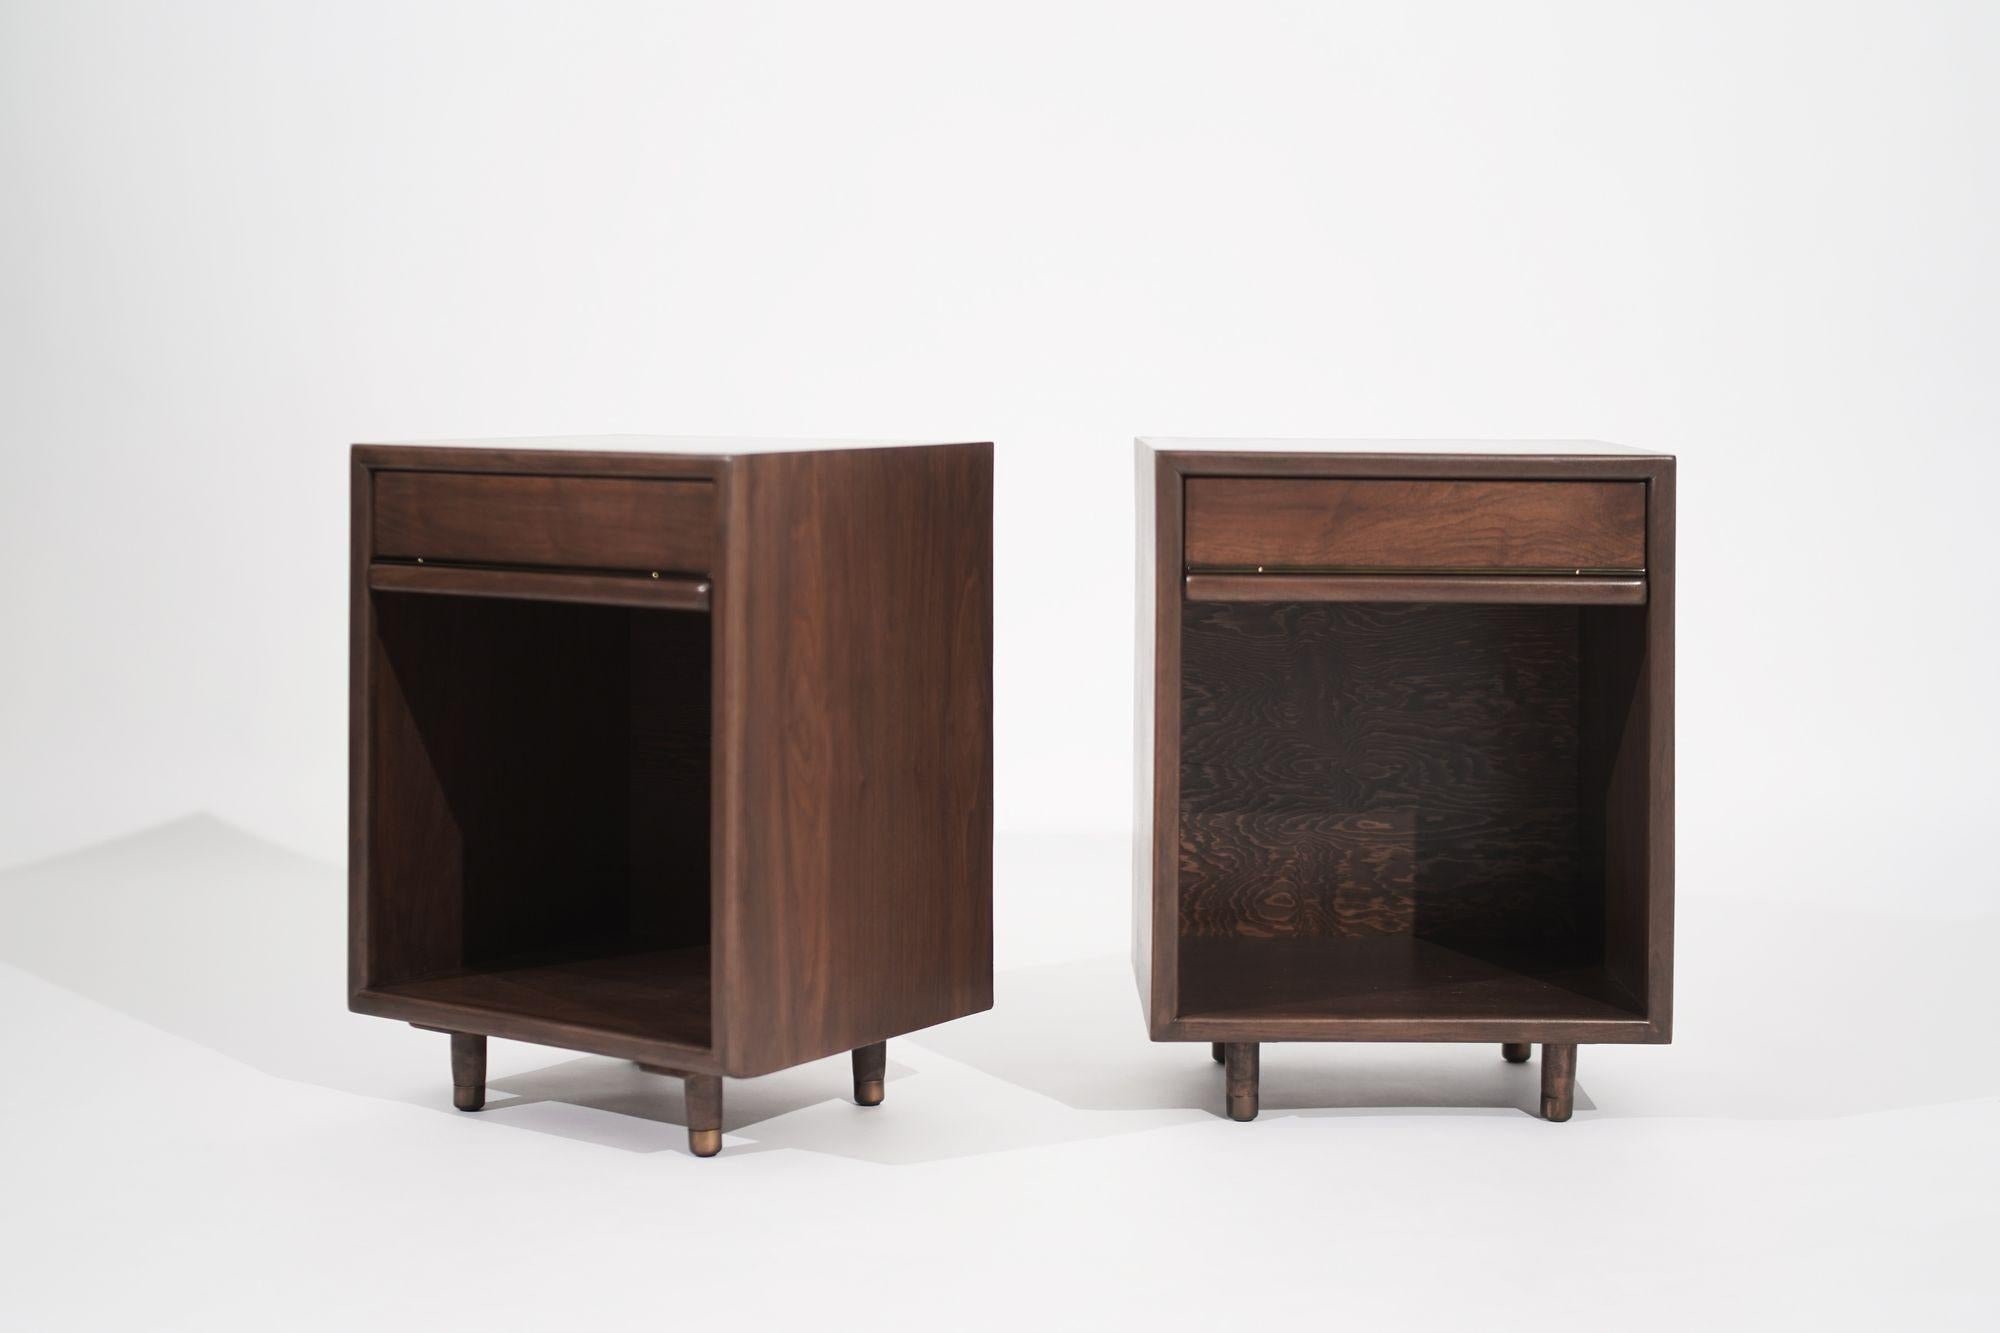 American Set of Minimalist Walnut End Tables, C. 1950s For Sale